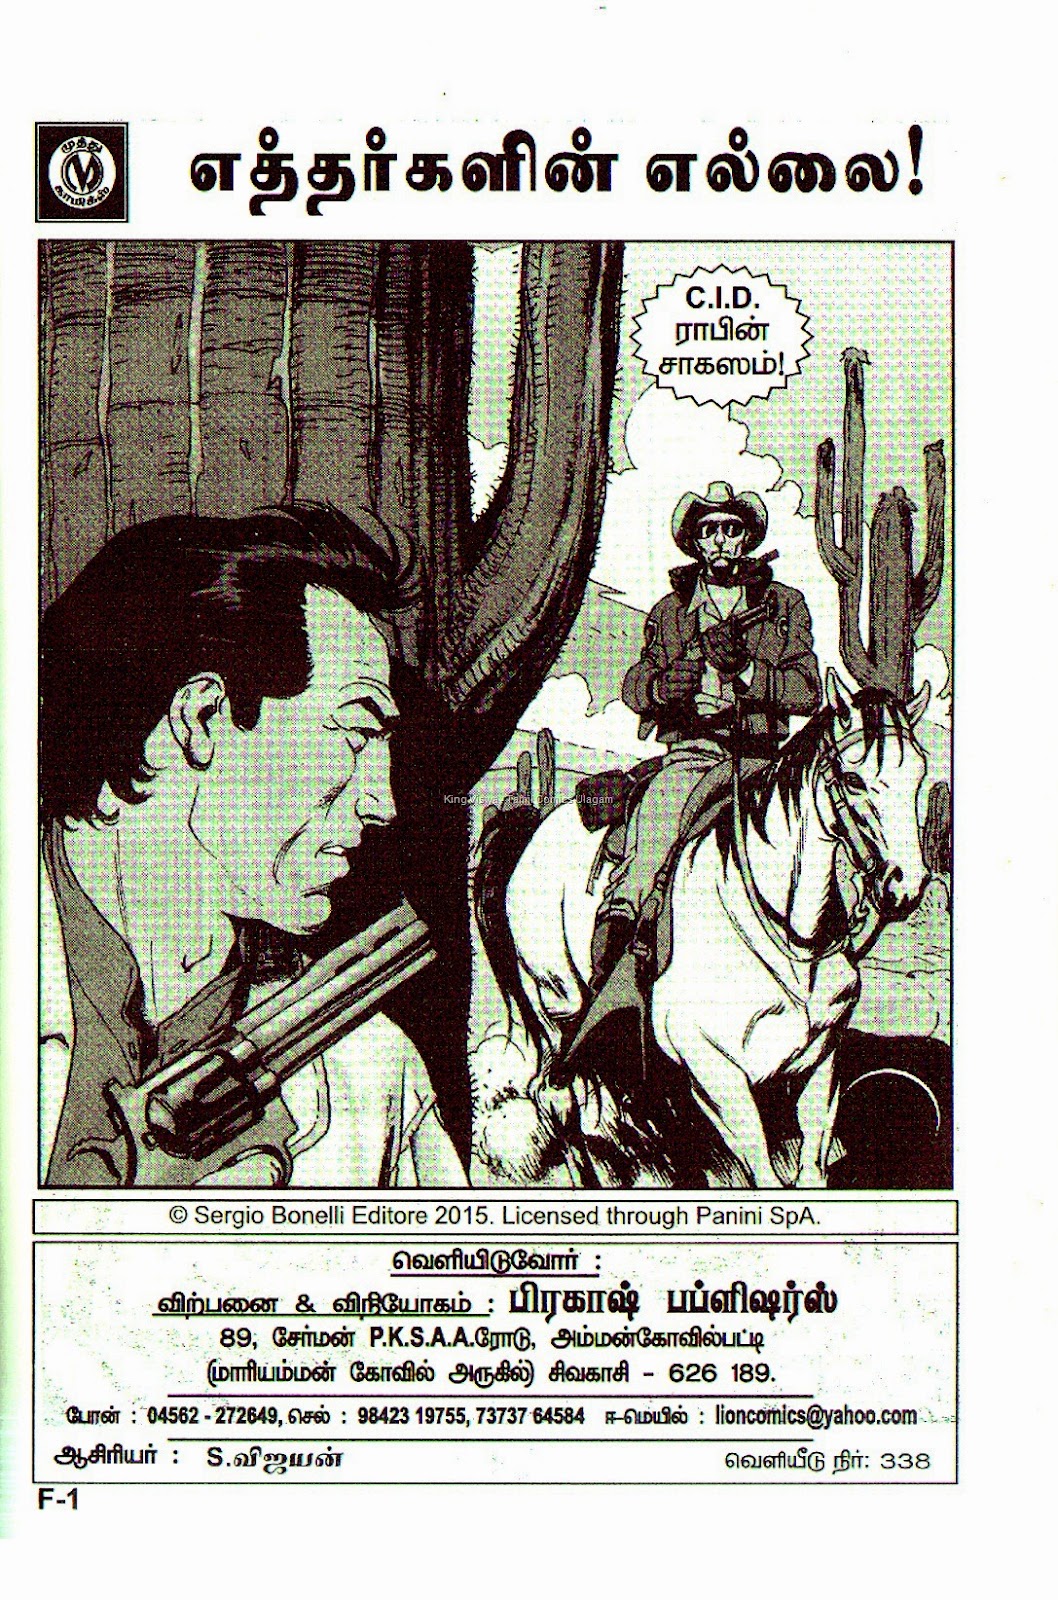 [Muthu%2520Comics%2520Issue%2520No%2520338%2520Dated%2520March%25202015%2520CID%2520Robin%2520Ethargalin%2520Ellaiyil%2520Page%2520No%252003%2520Title%2520Page%255B3%255D.jpg]